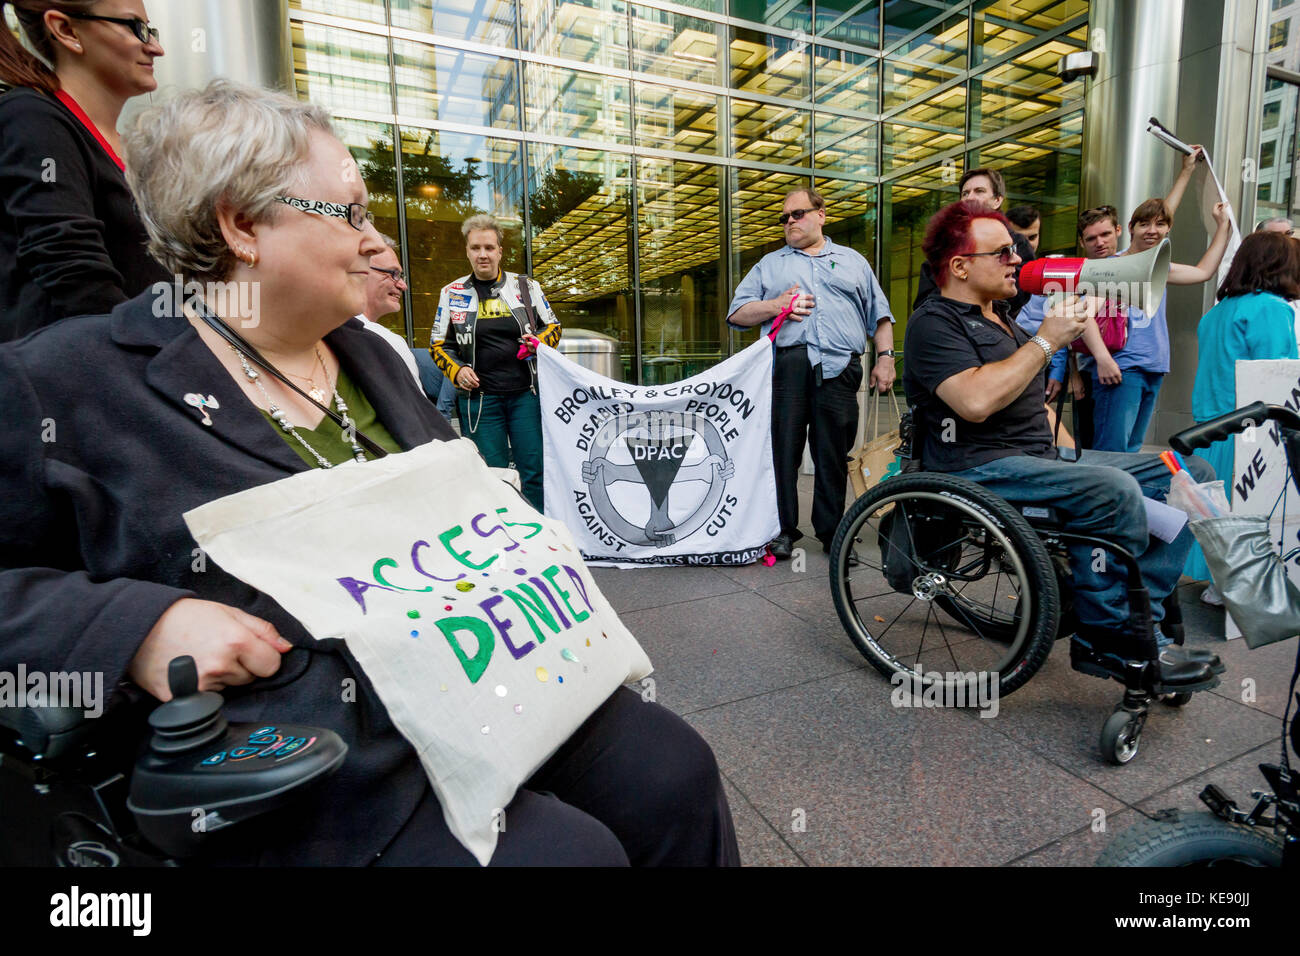 Disability campaigners protest outside the Crossrail head office building in Canary Wharf, London, UK. Stock Photo